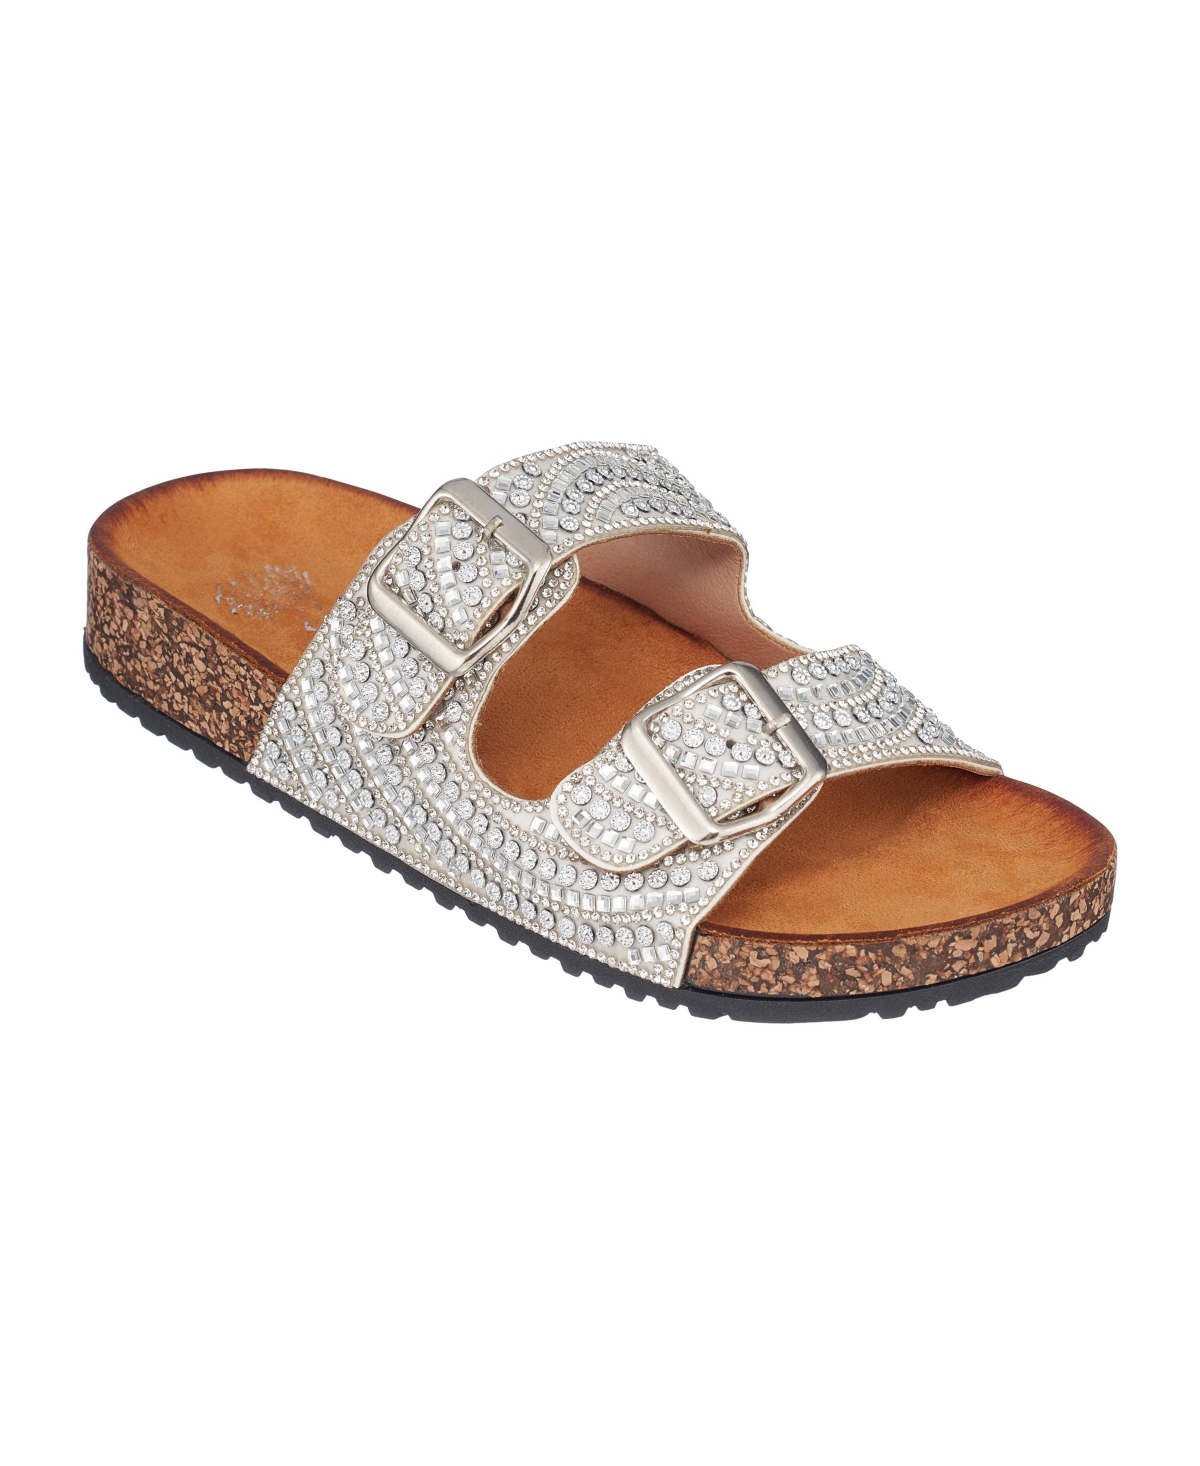 Women's Holly Footbed Sandals - Silver-Tone